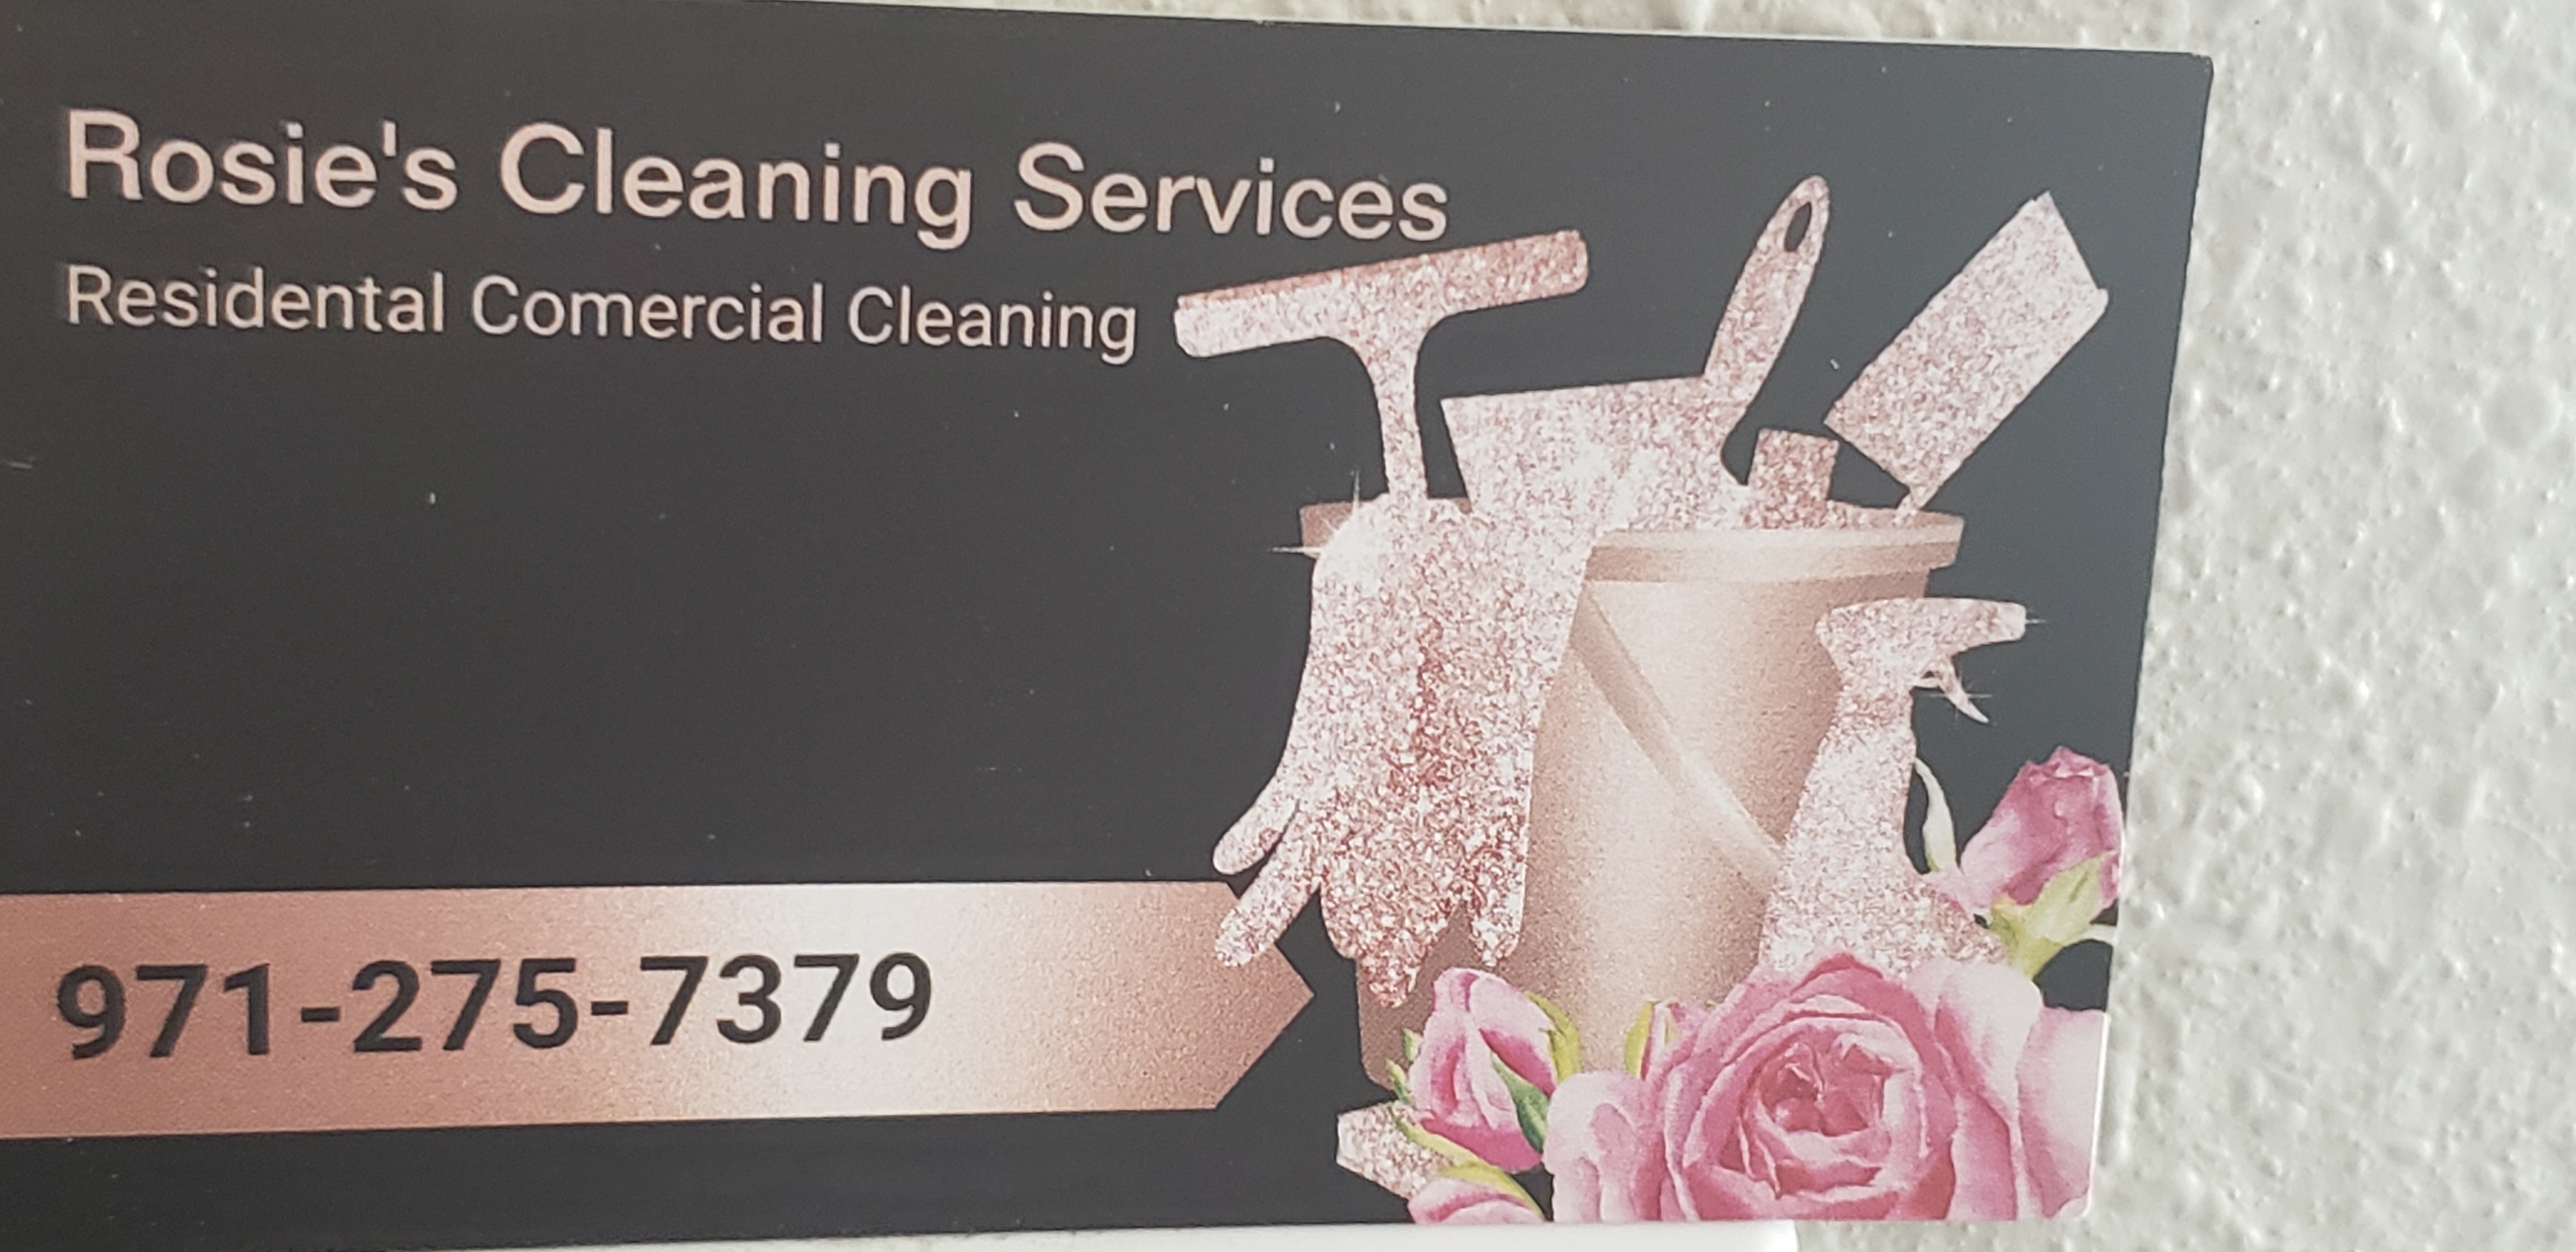 Roses Cleaning Services Logo